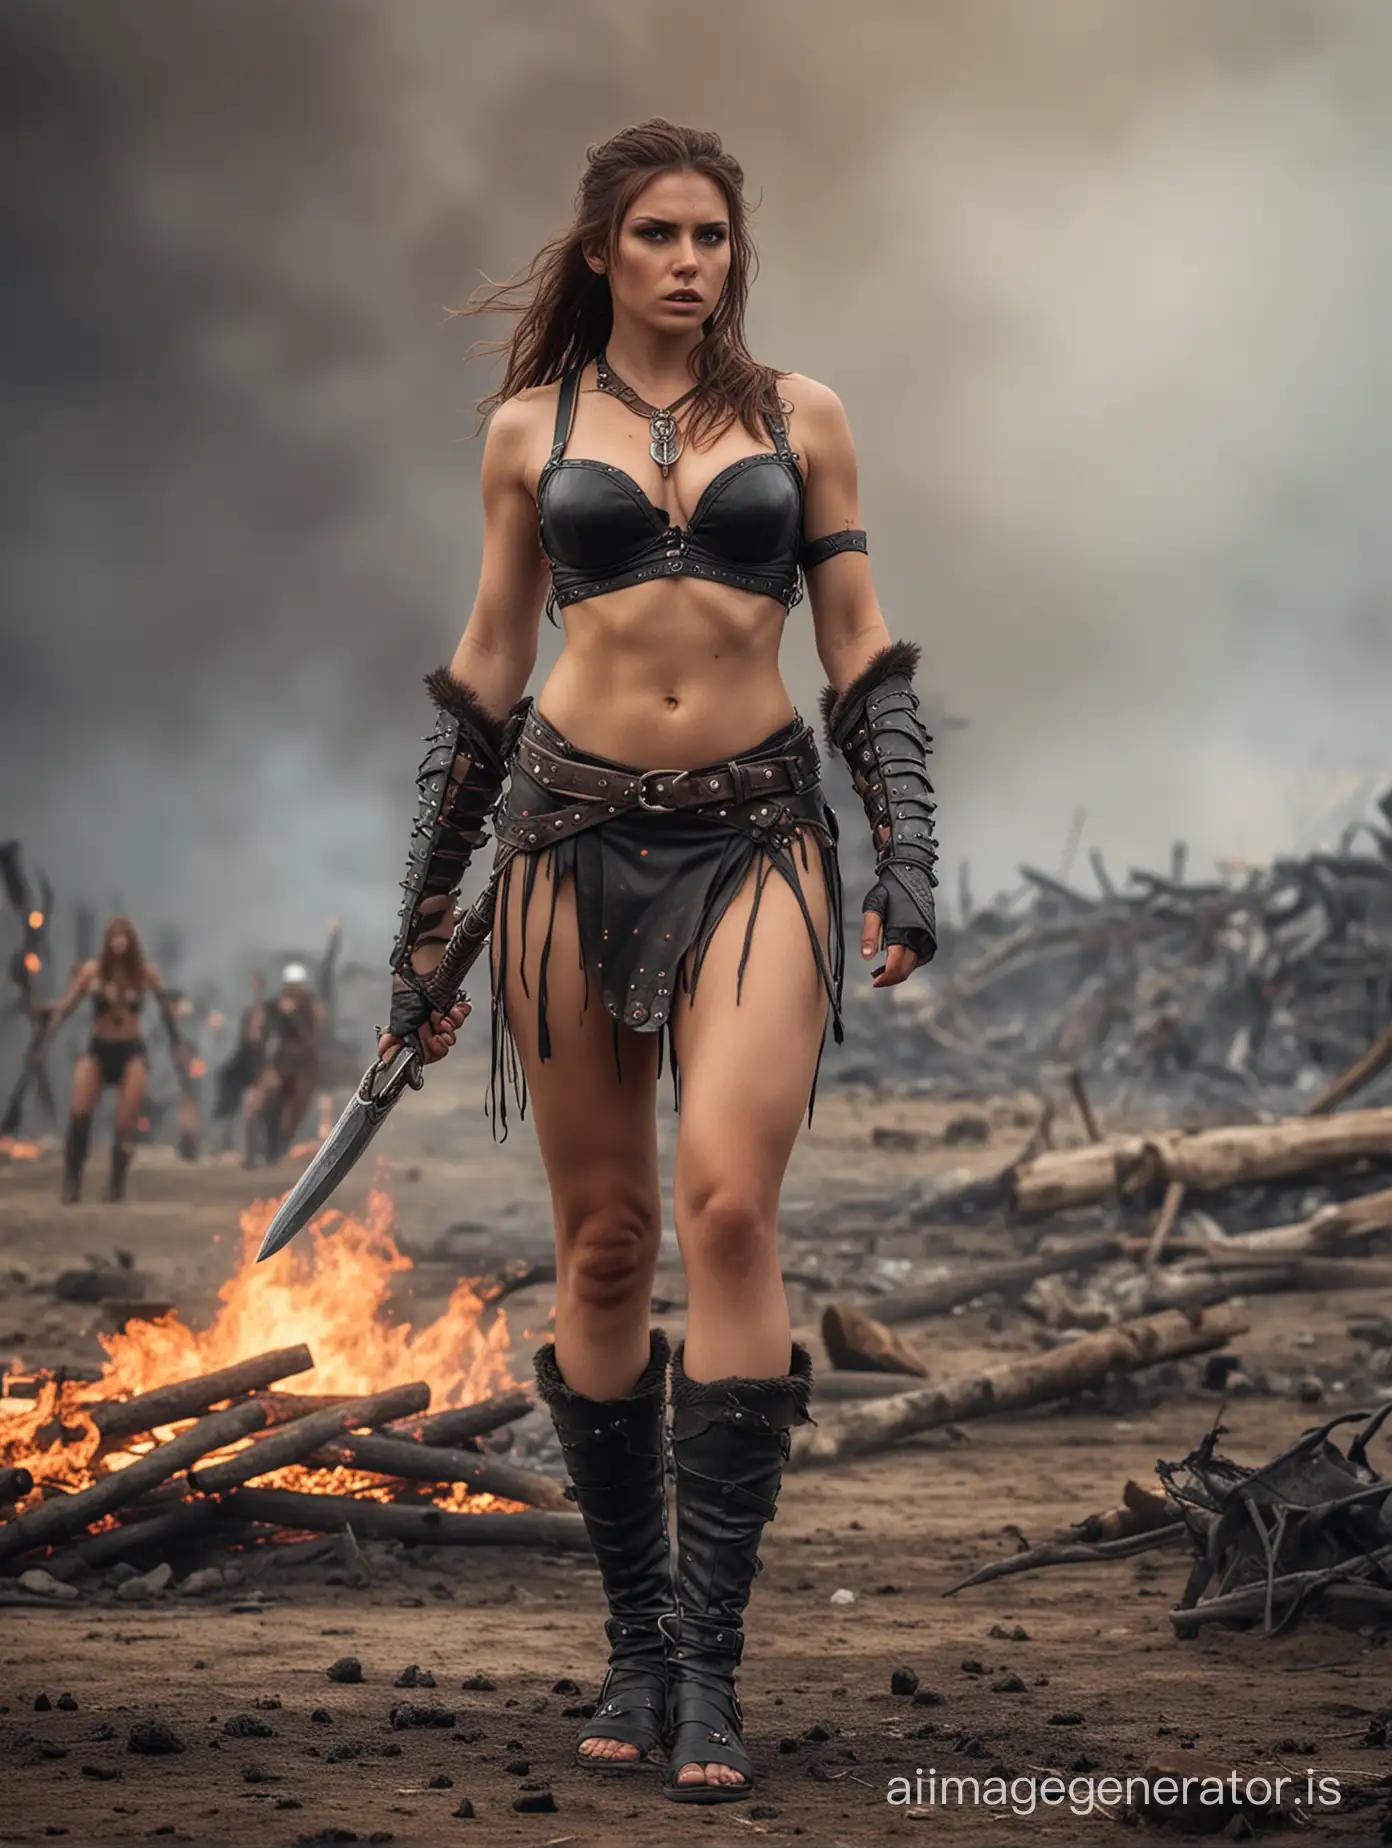 Scantily clad female barbarian young woman standing alone on the battlefield, skimpy outfit, Chaos and fires